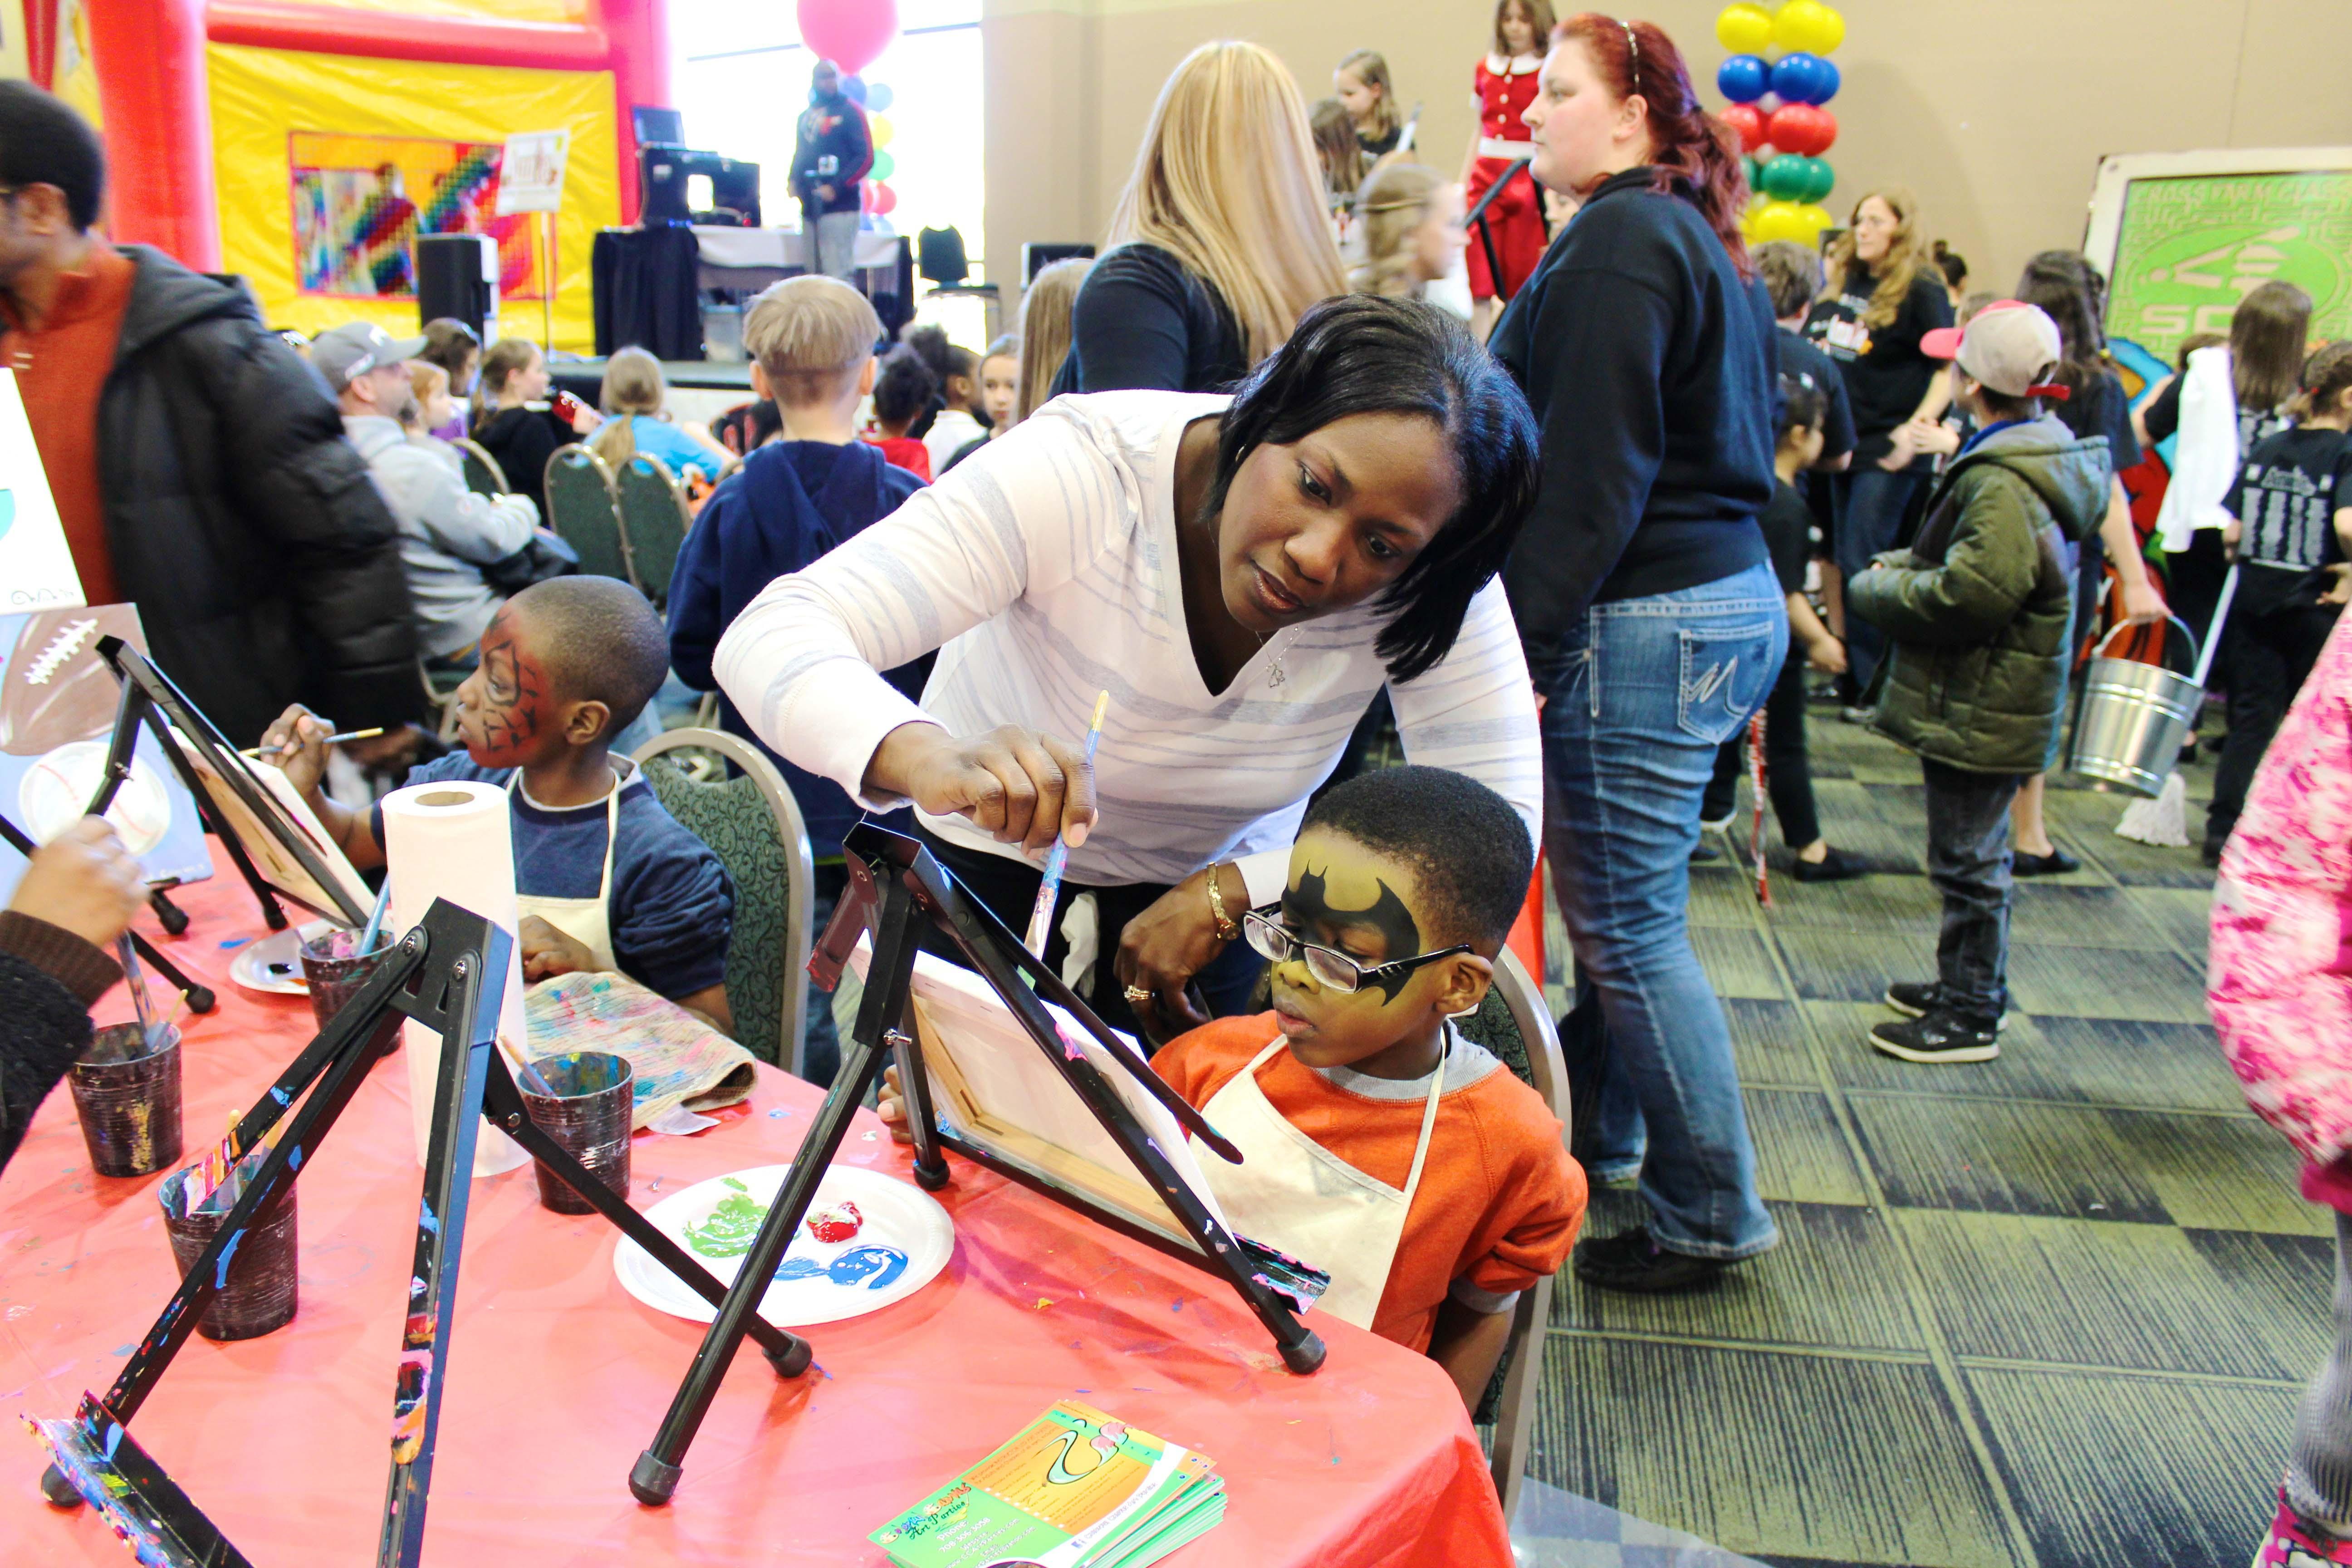 Children have the opportunity to paint their faces, paint canvases and peruse more than 100 exhibitions at the Chicagoland Kids Expo. (Courtesy of Chicagoland Kids Expo, 2015)